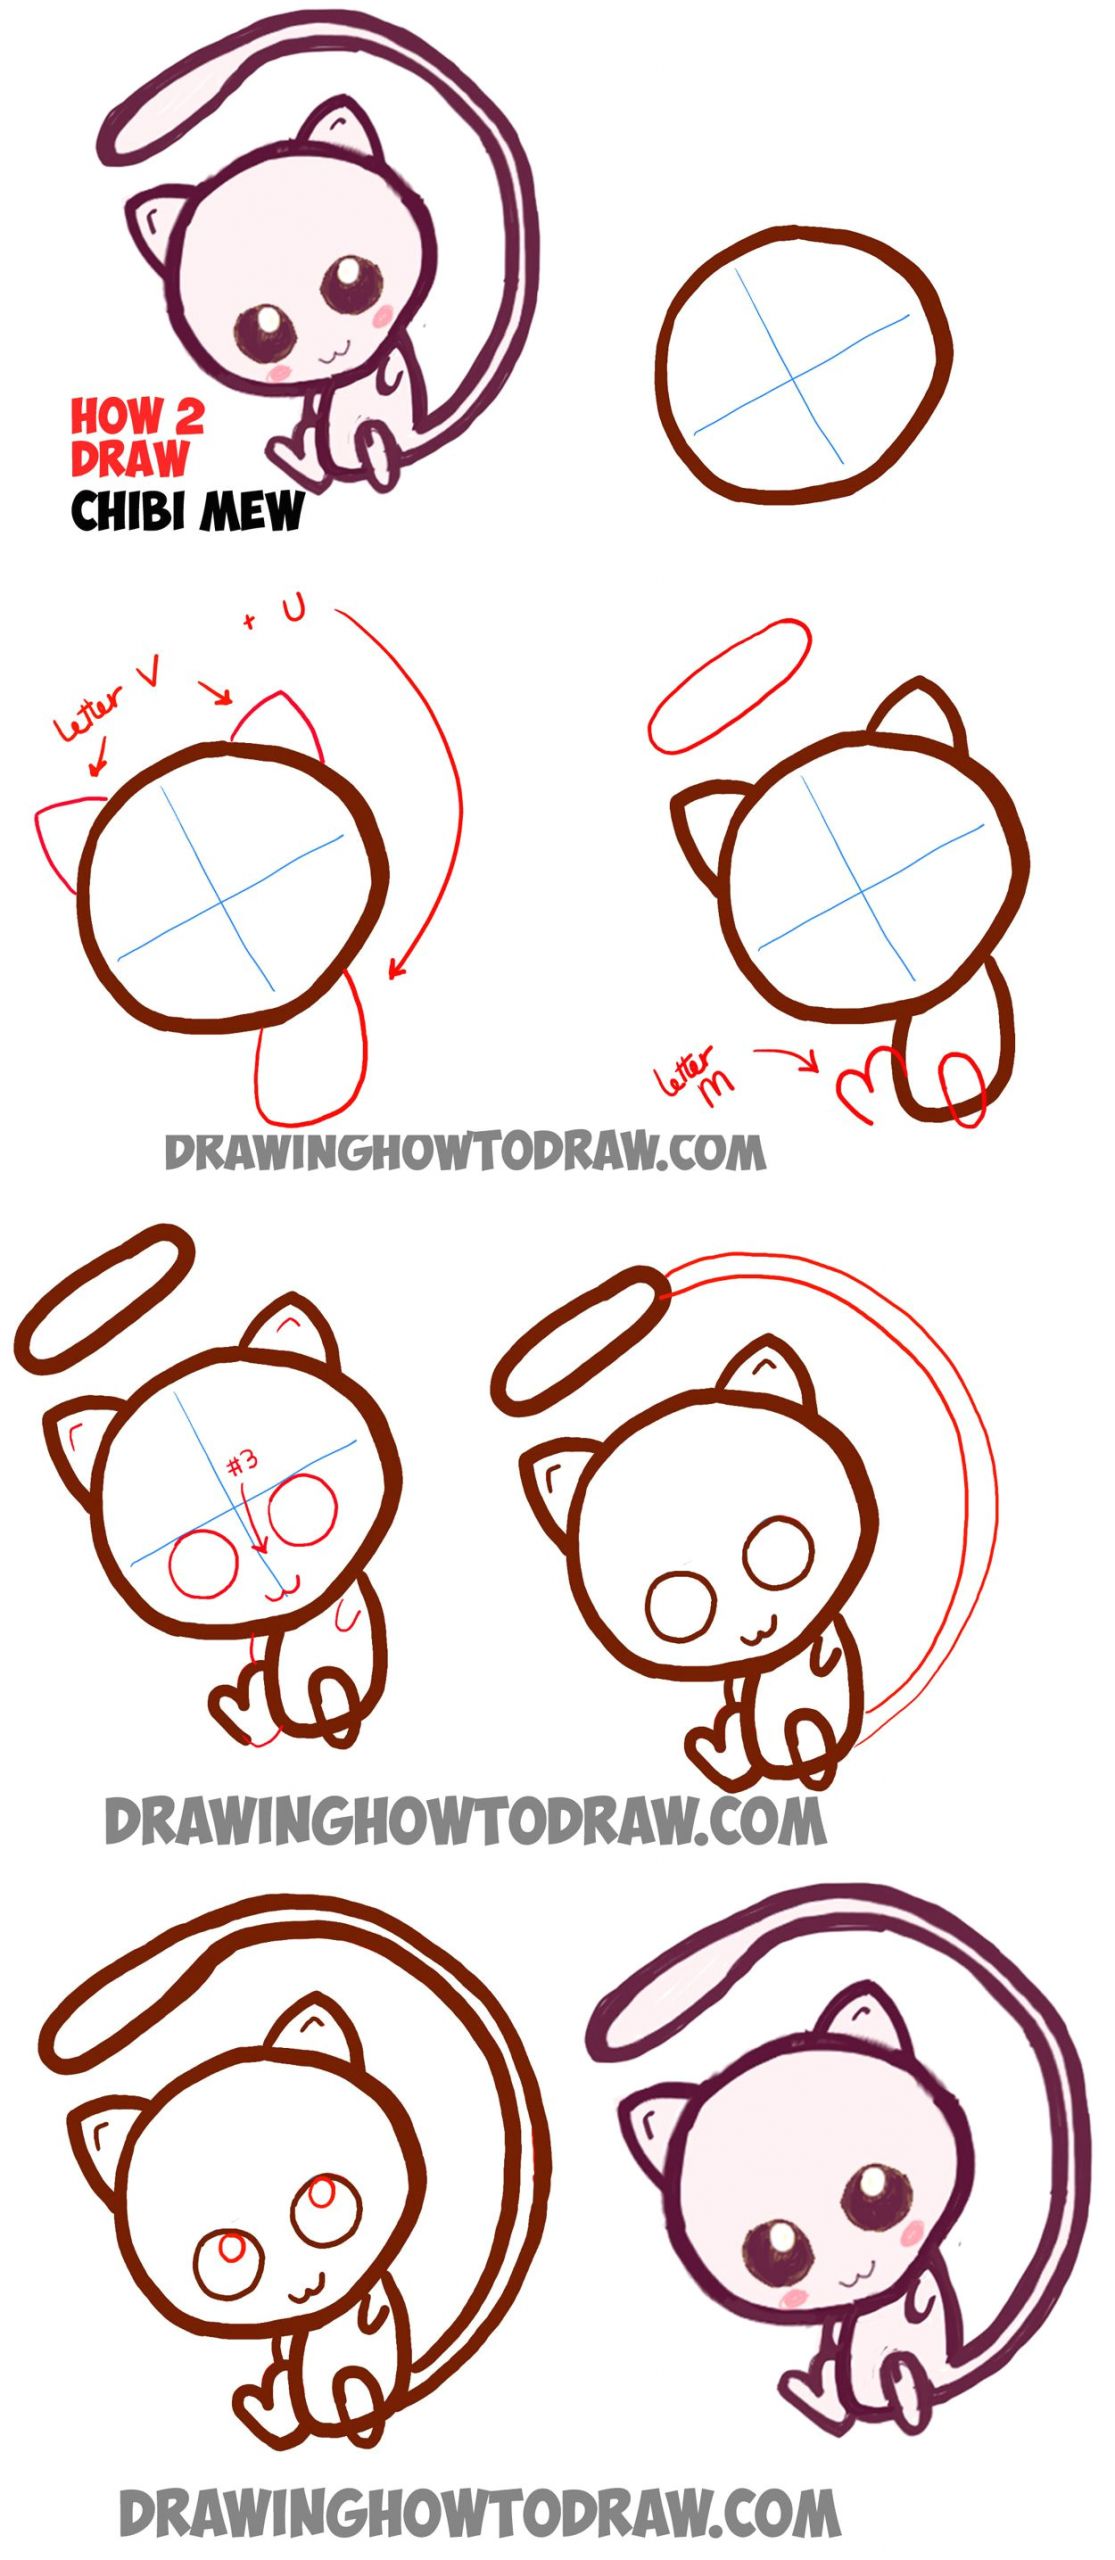 Easy to Draw Cute How to Draw Cute Baby Chibi Mew From Pokemon Easy Step by